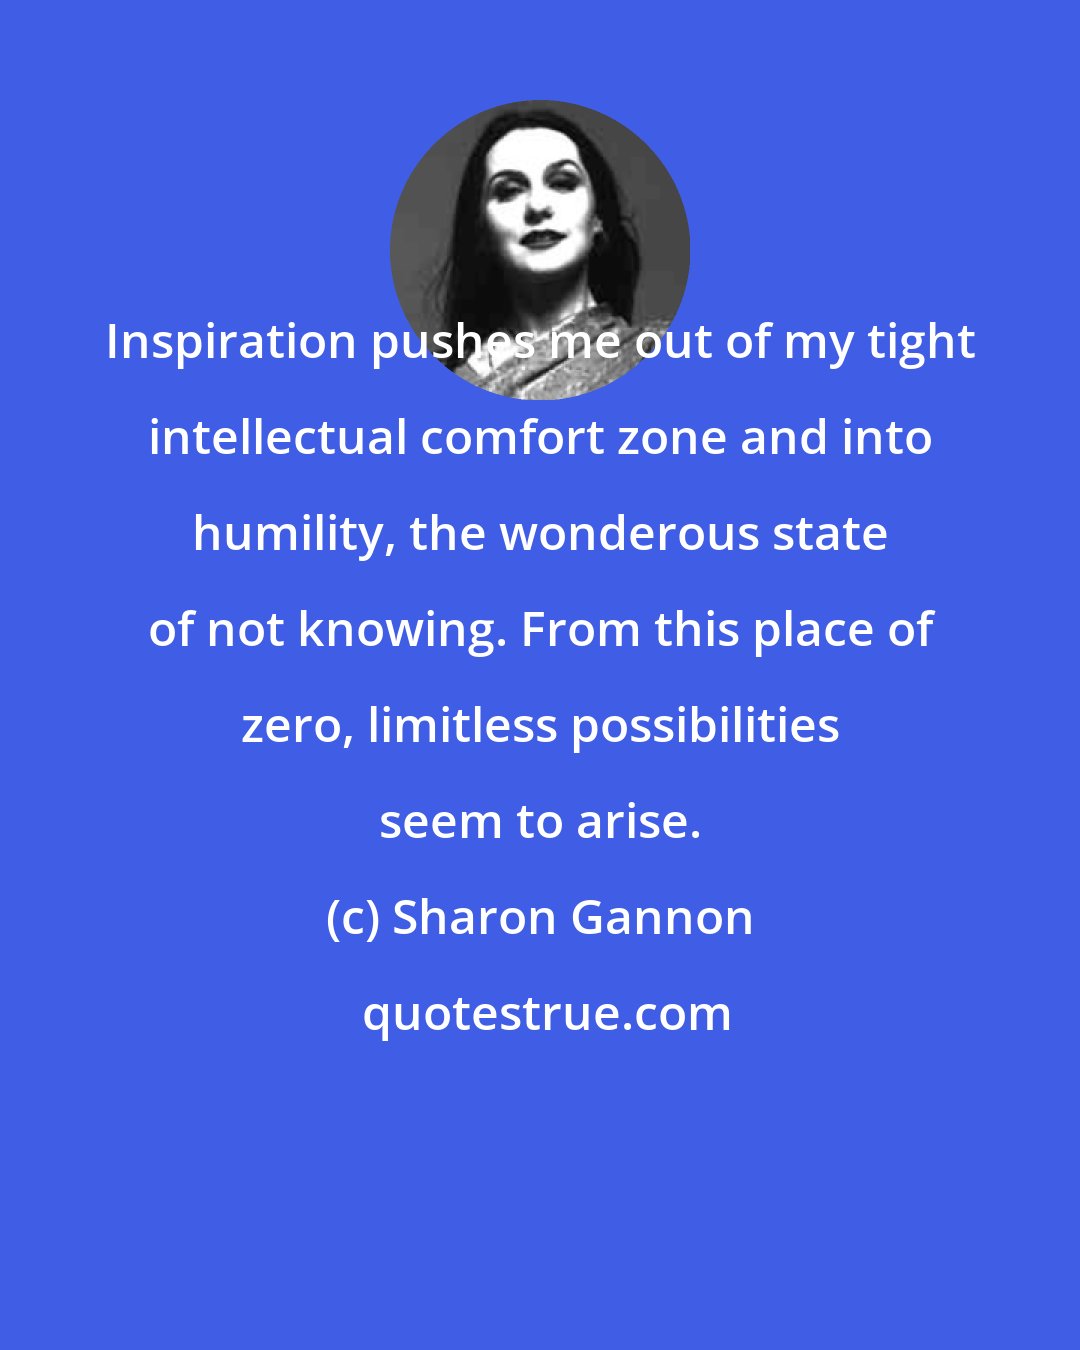 Sharon Gannon: Inspiration pushes me out of my tight intellectual comfort zone and into humility, the wonderous state of not knowing. From this place of zero, limitless possibilities seem to arise.